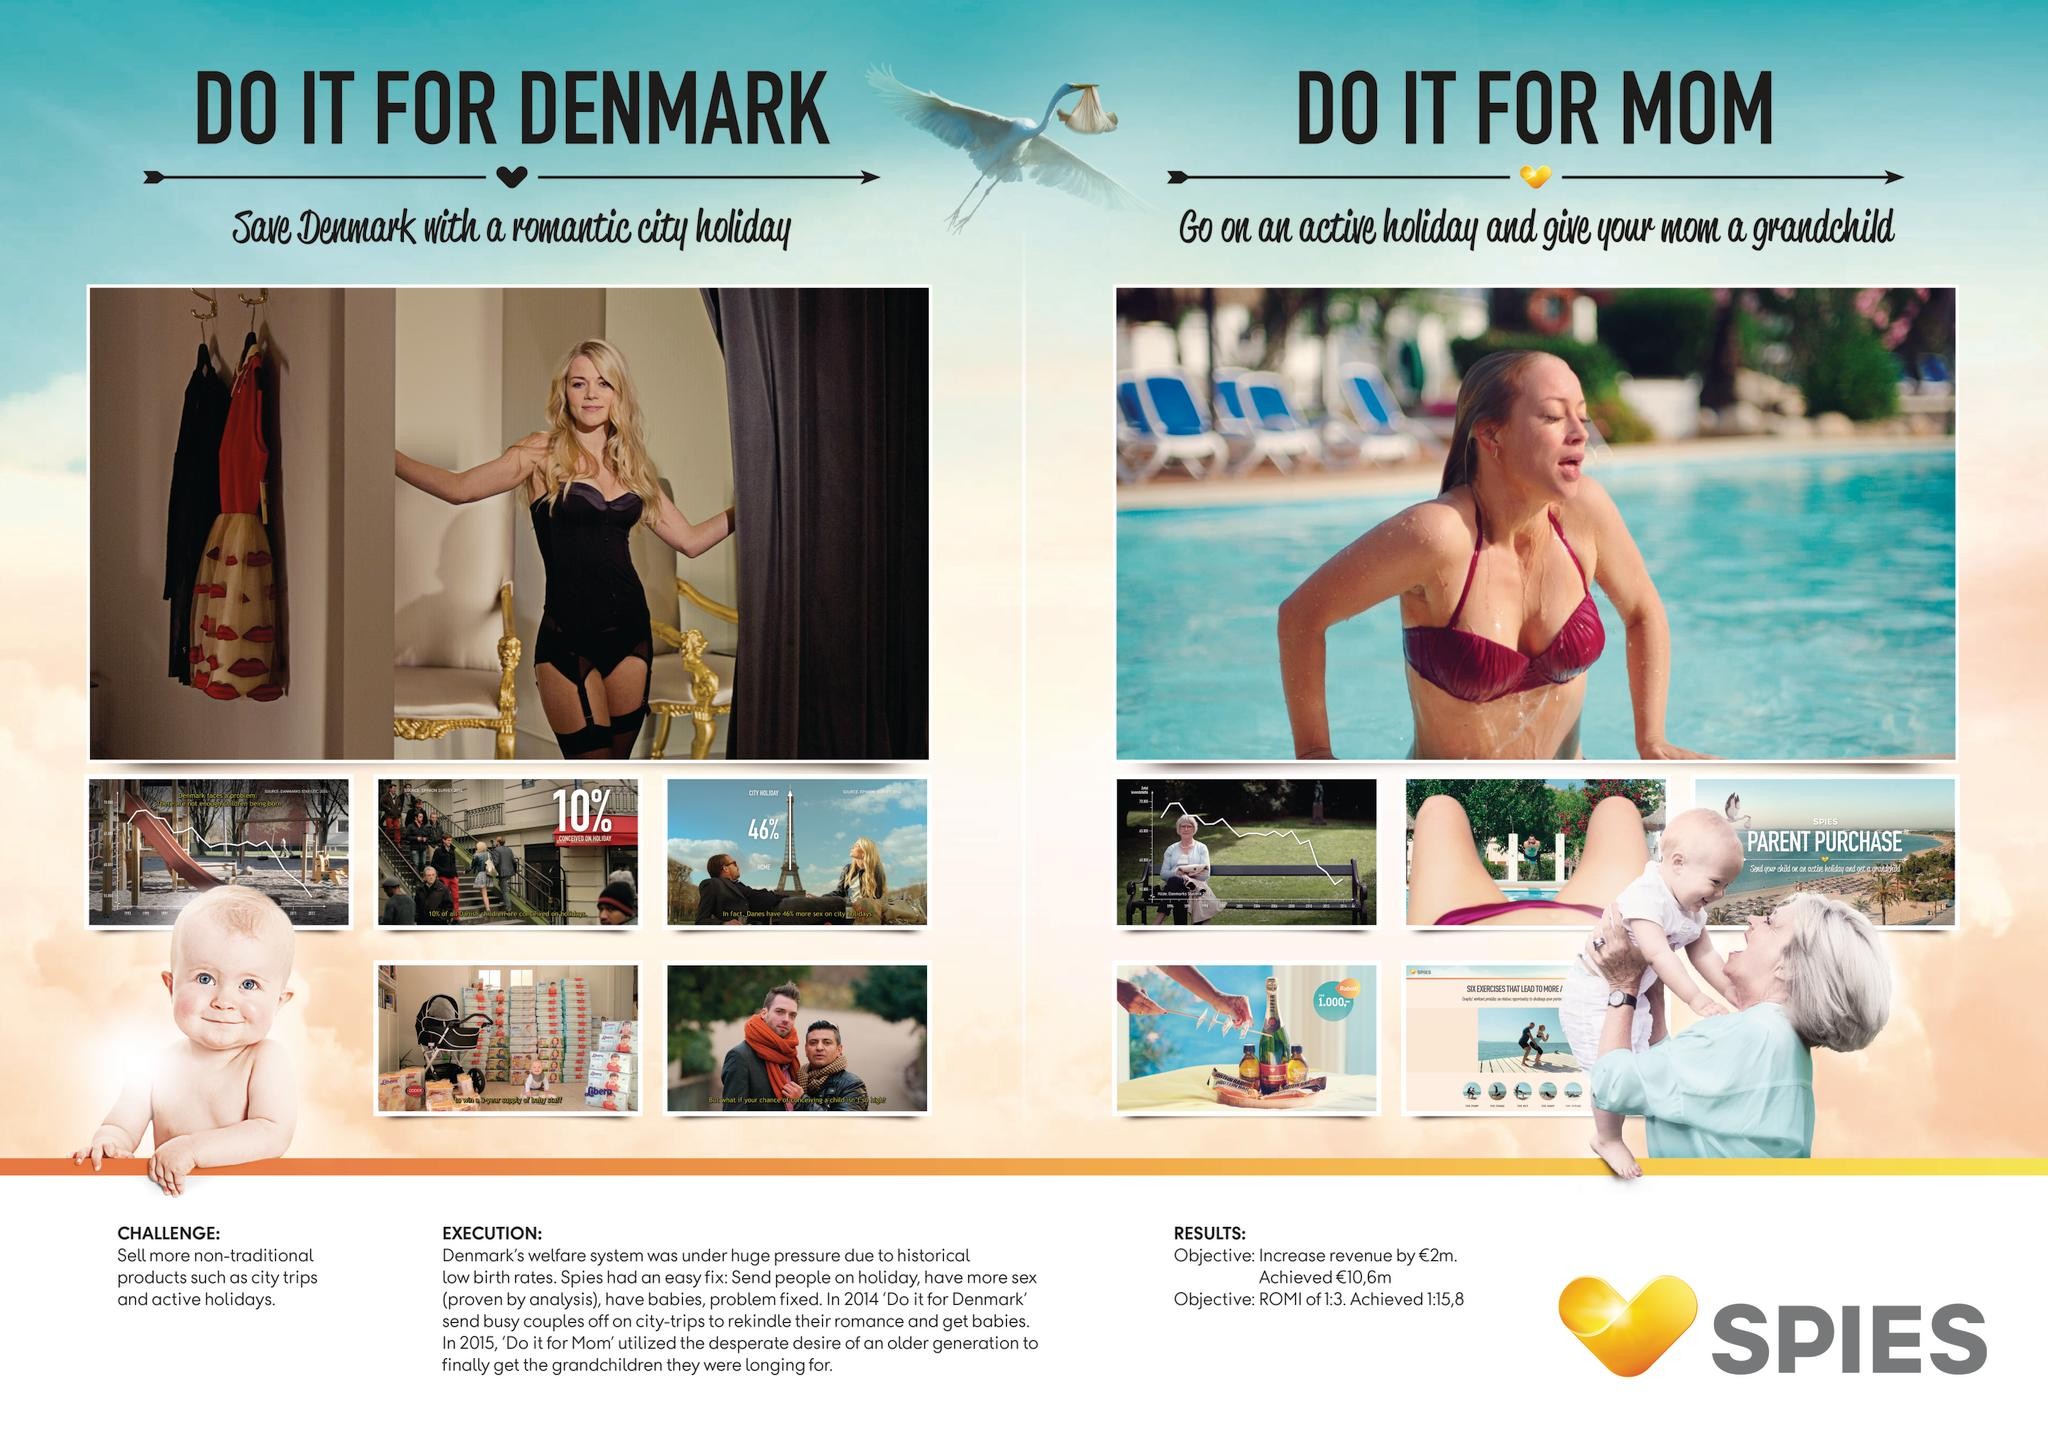 Do it for Denmark and Do it for Mom